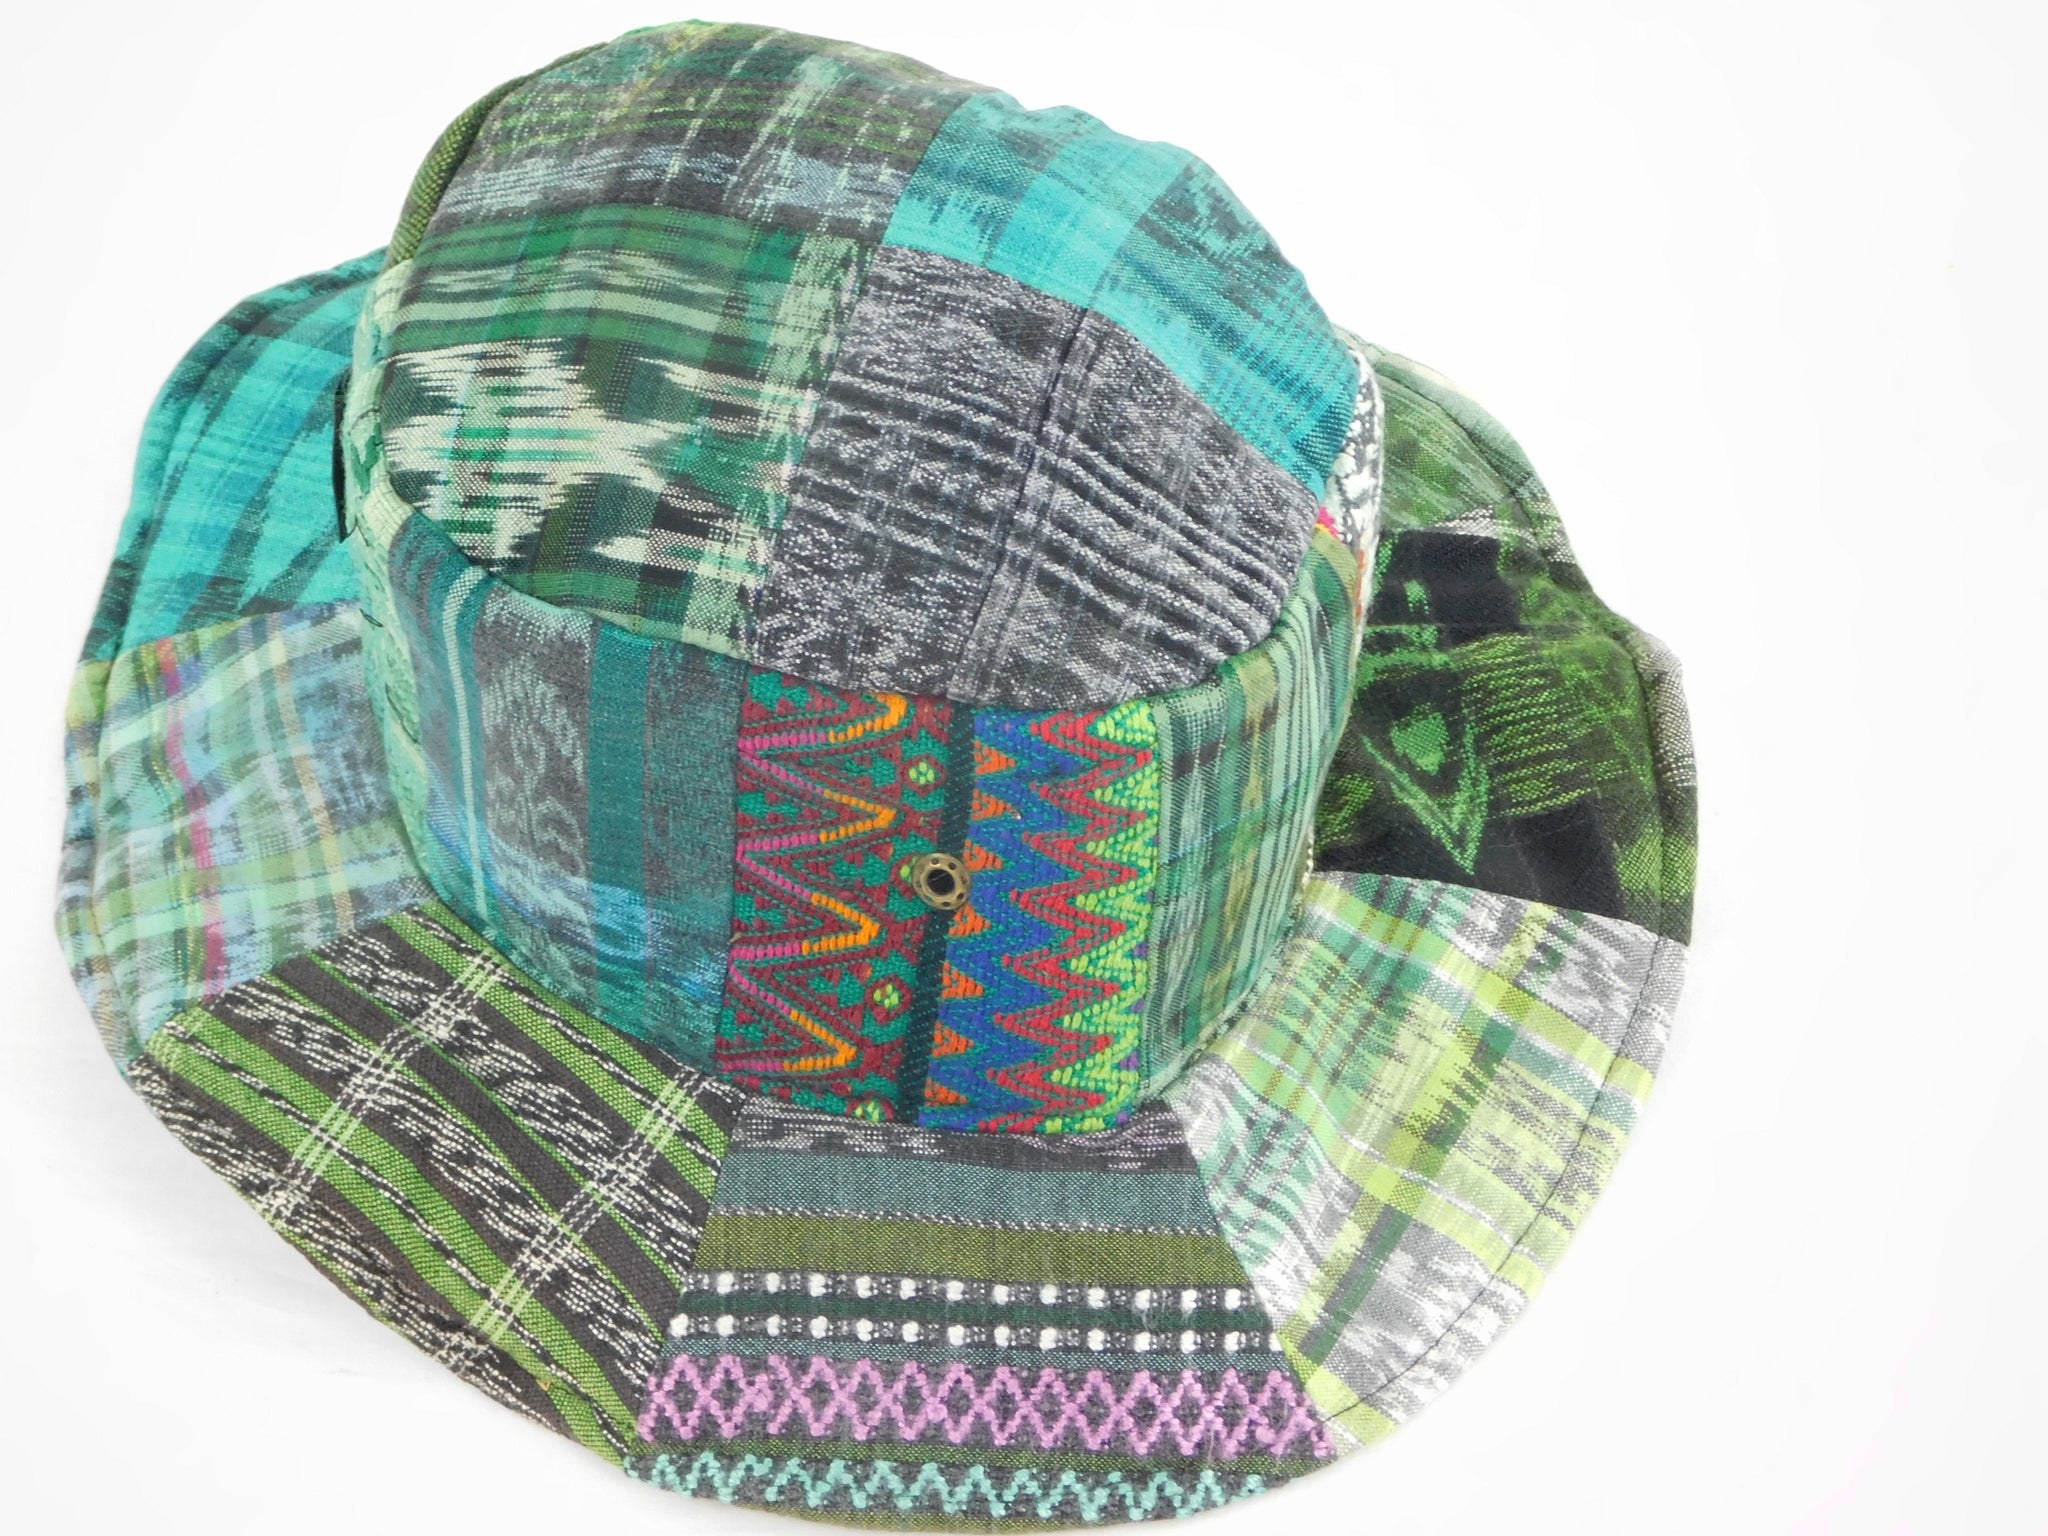 Patchwork hat in hand made fabric